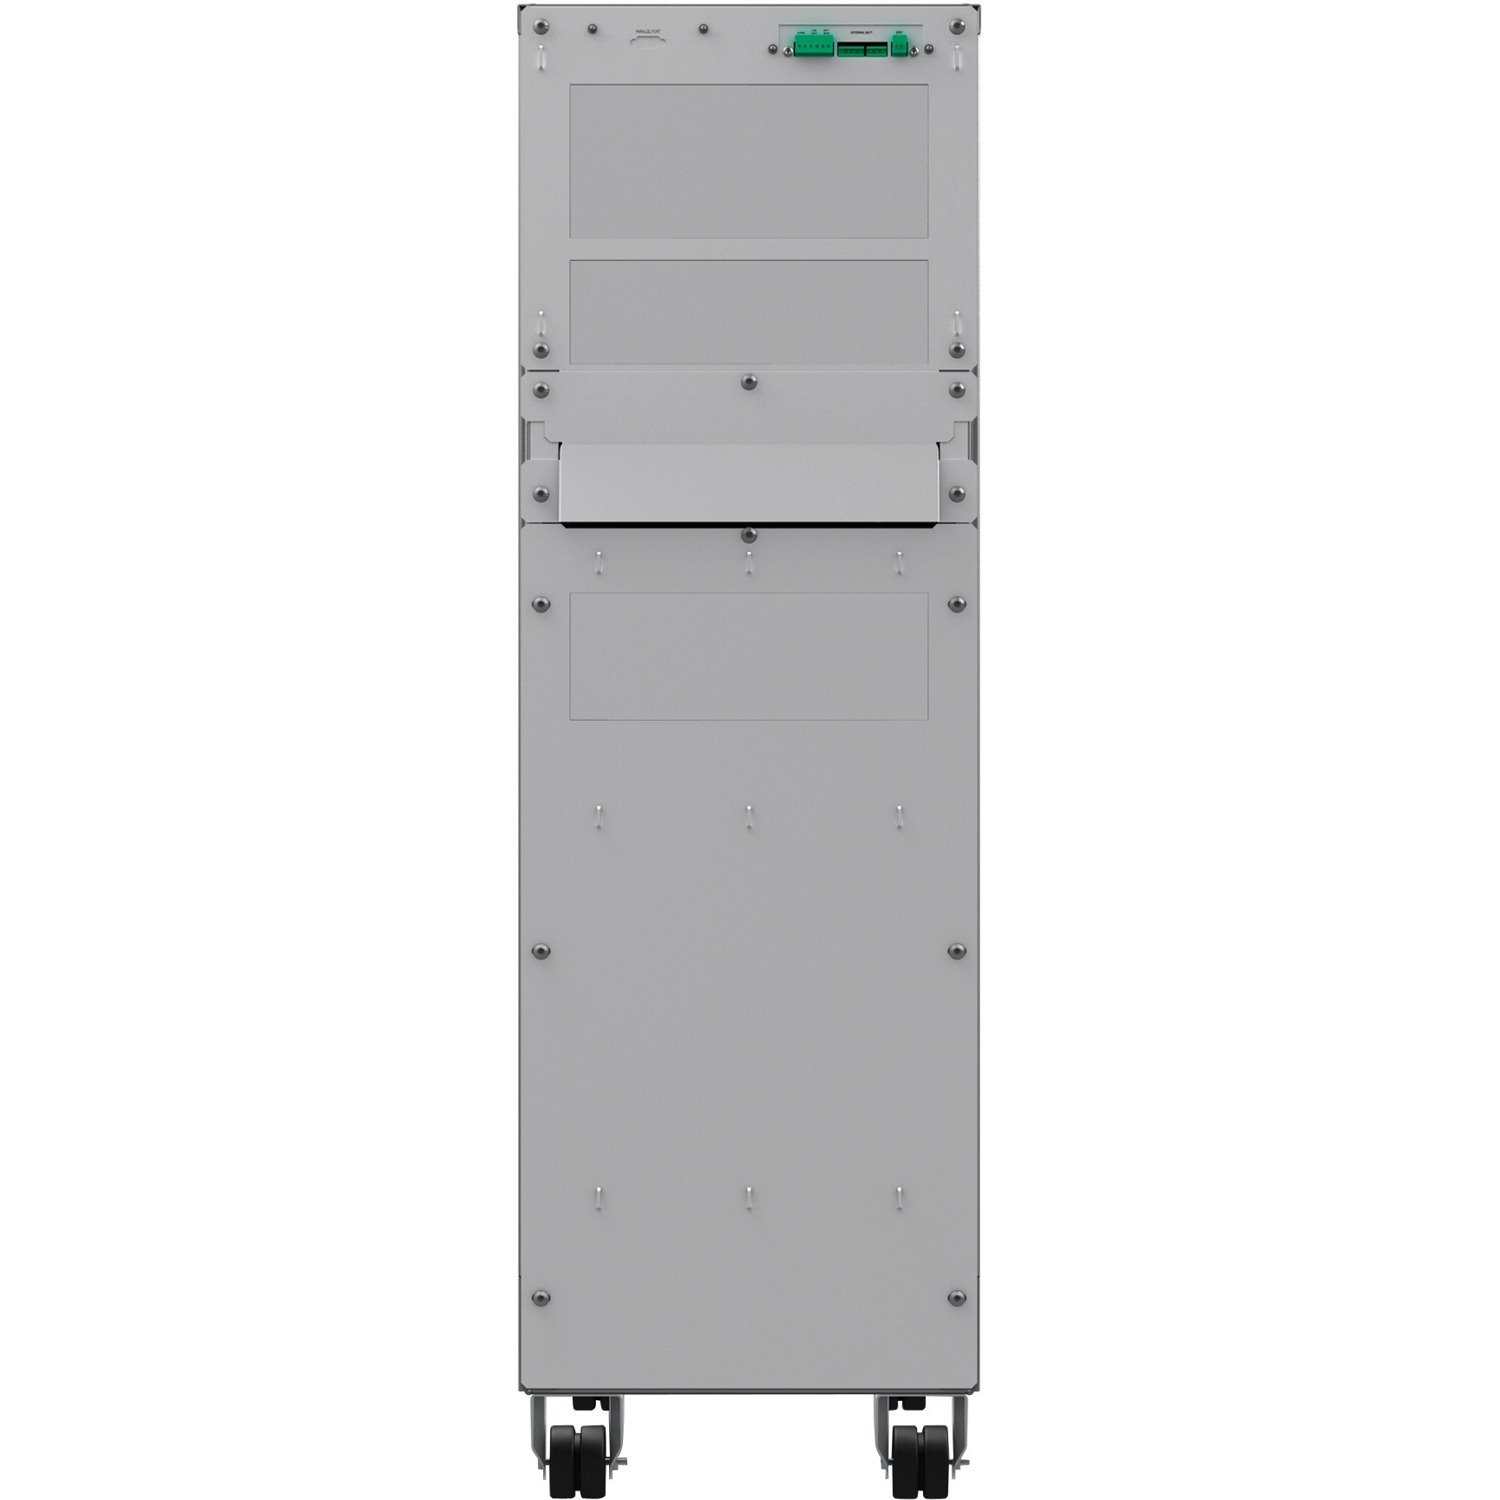 APC by Schneider Electric MGE Galaxy Double Conversion Online UPS - 10 kVA - Three Phase